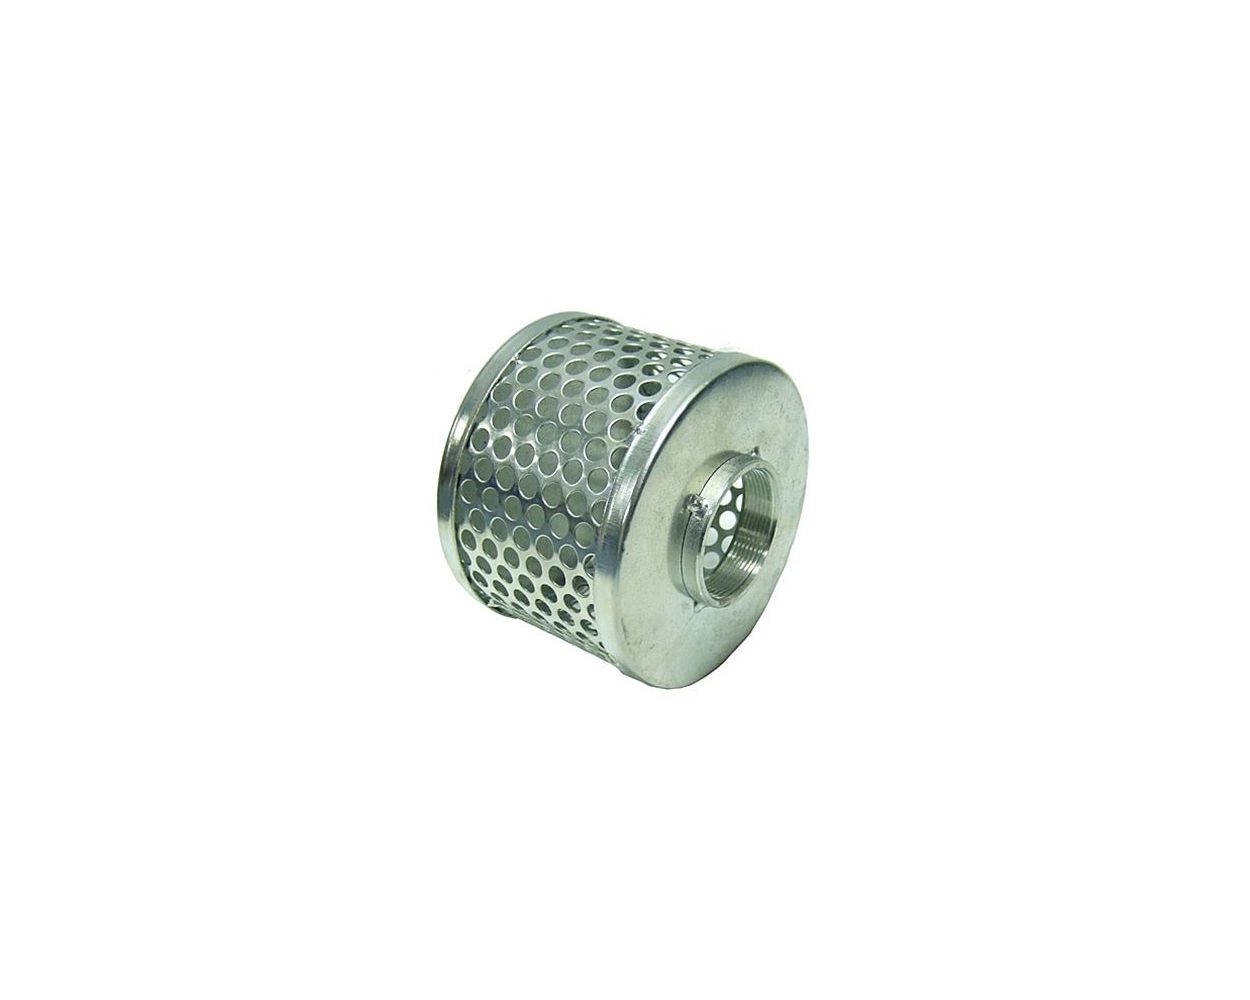 https://www.everything-ponds.com/media/catalog/product/cache/3ddb7950e7e0440d5b6136ee3261eb6f/s/t/steel_suction_strainer_basket.jpg